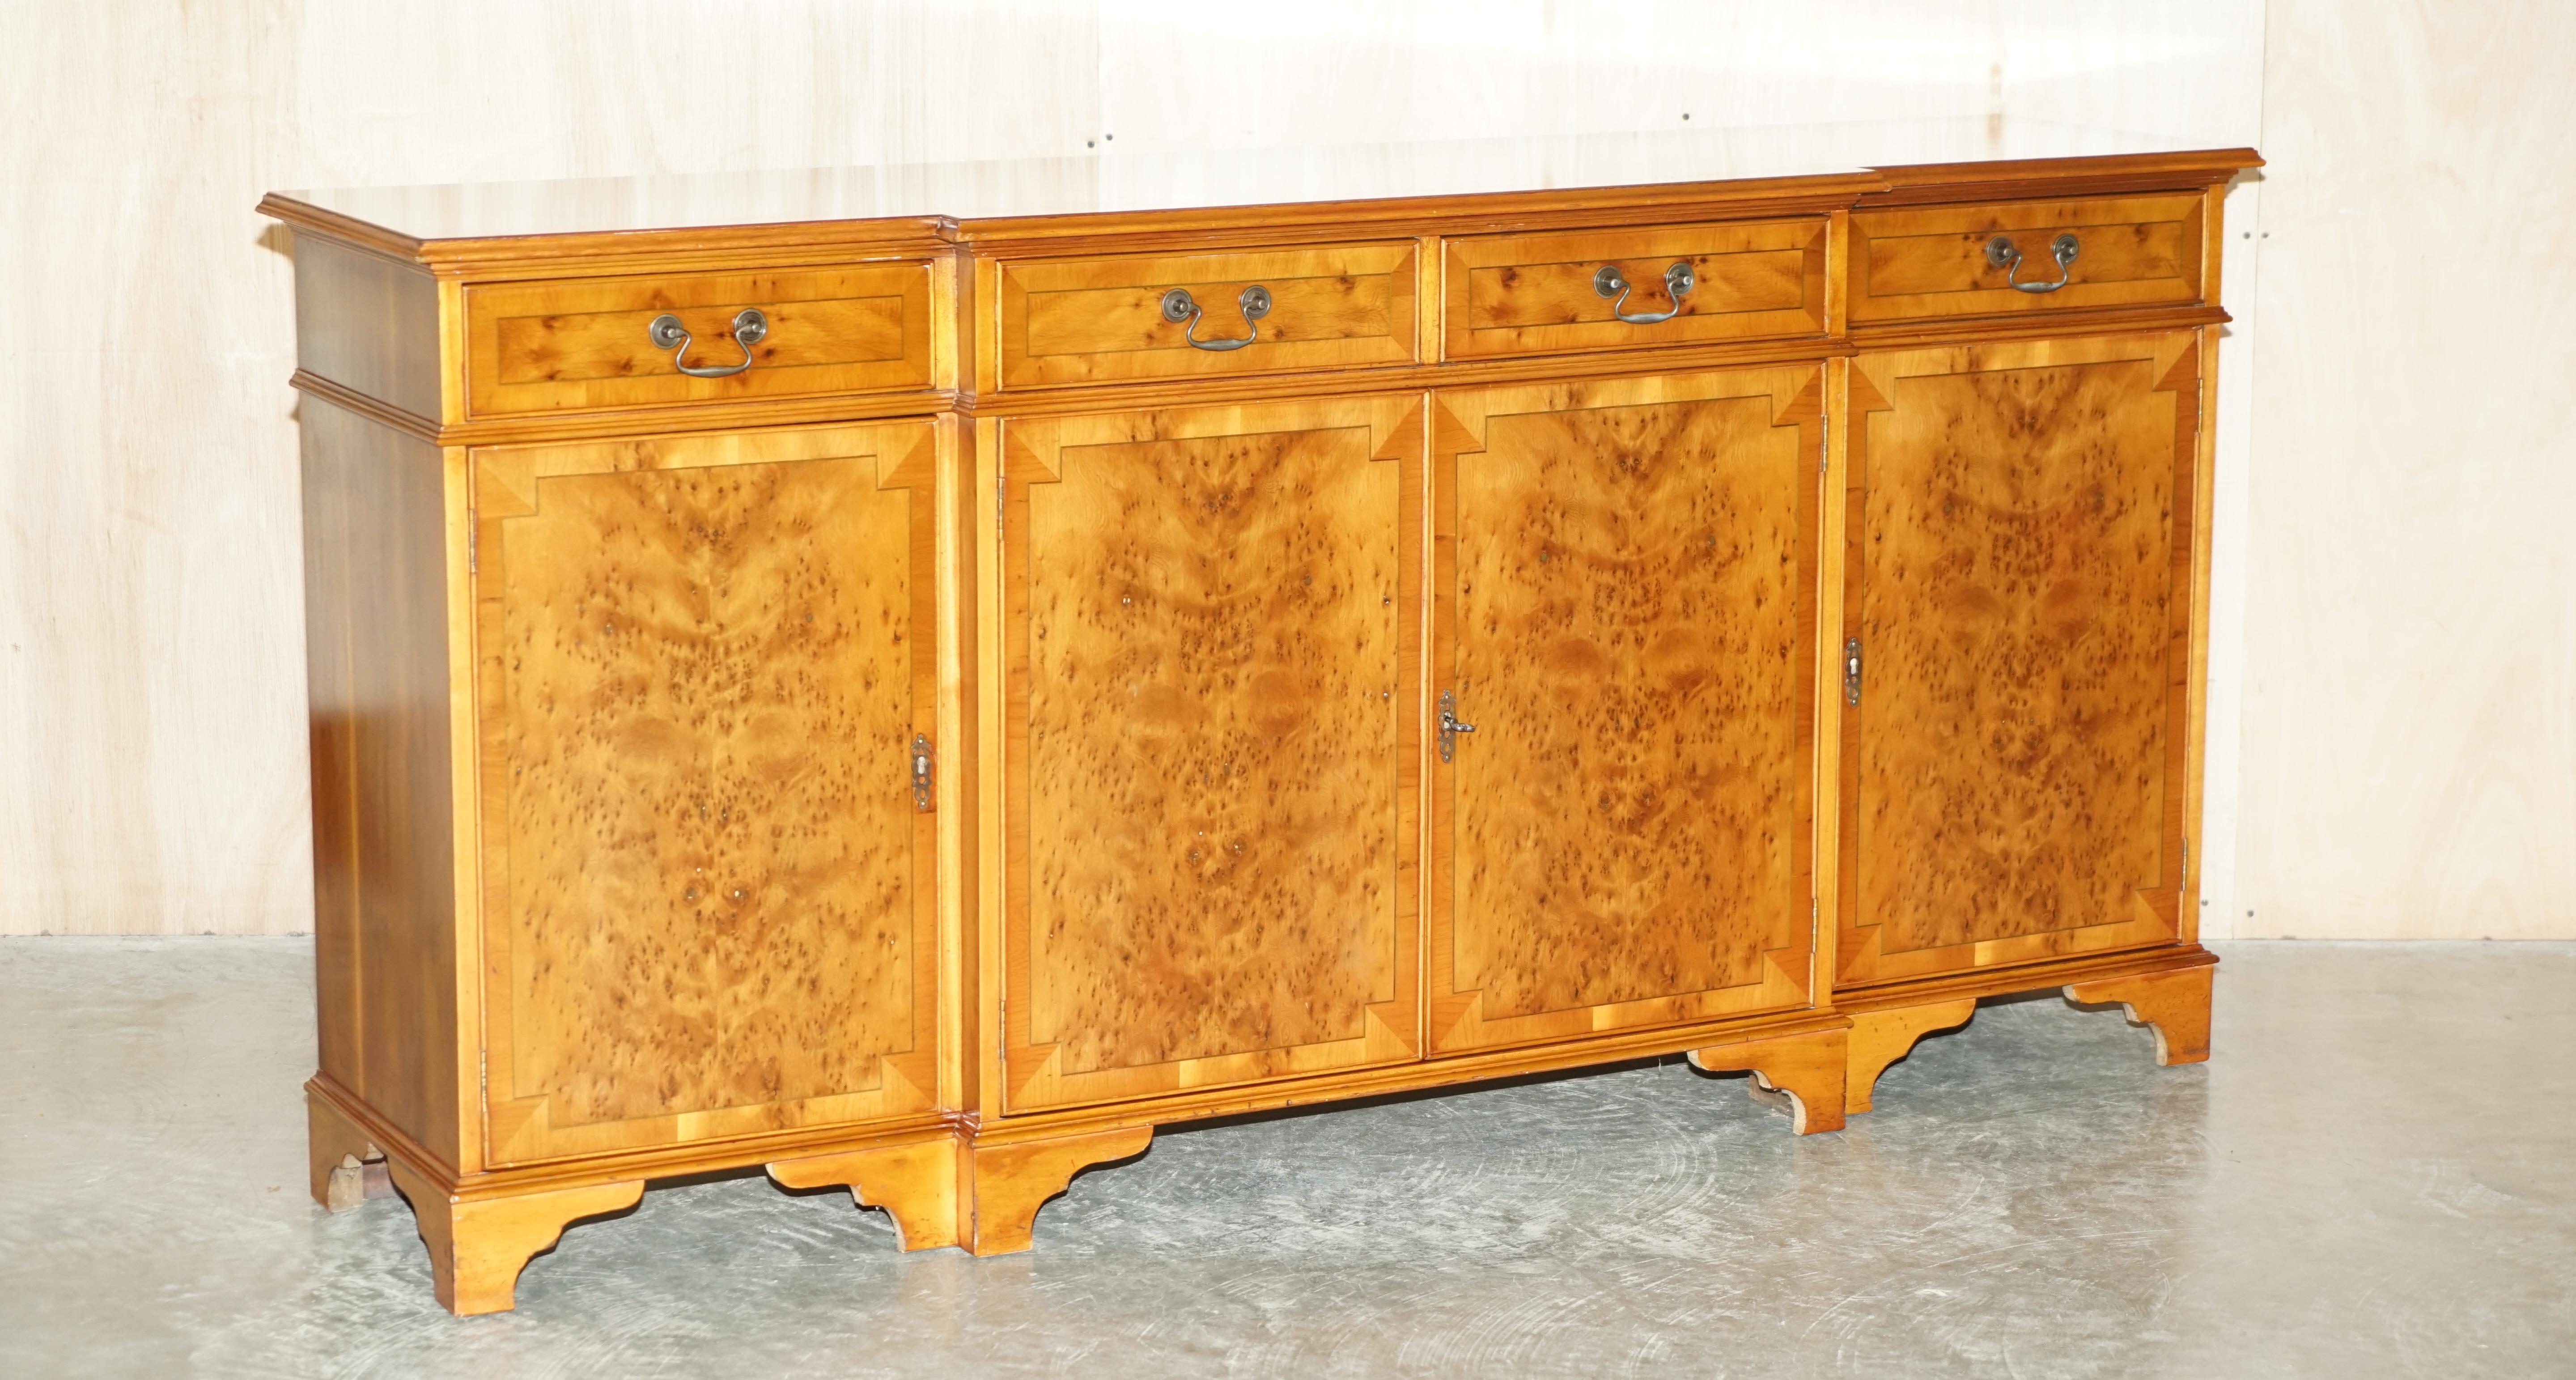 We are delighted to offer for sale this exquisite, Burr and Burl Walnut Breakfront sideboard with four large drawers to the top

A very good looking and well made piece, this is basically art furniture, the grain of timber in the right light